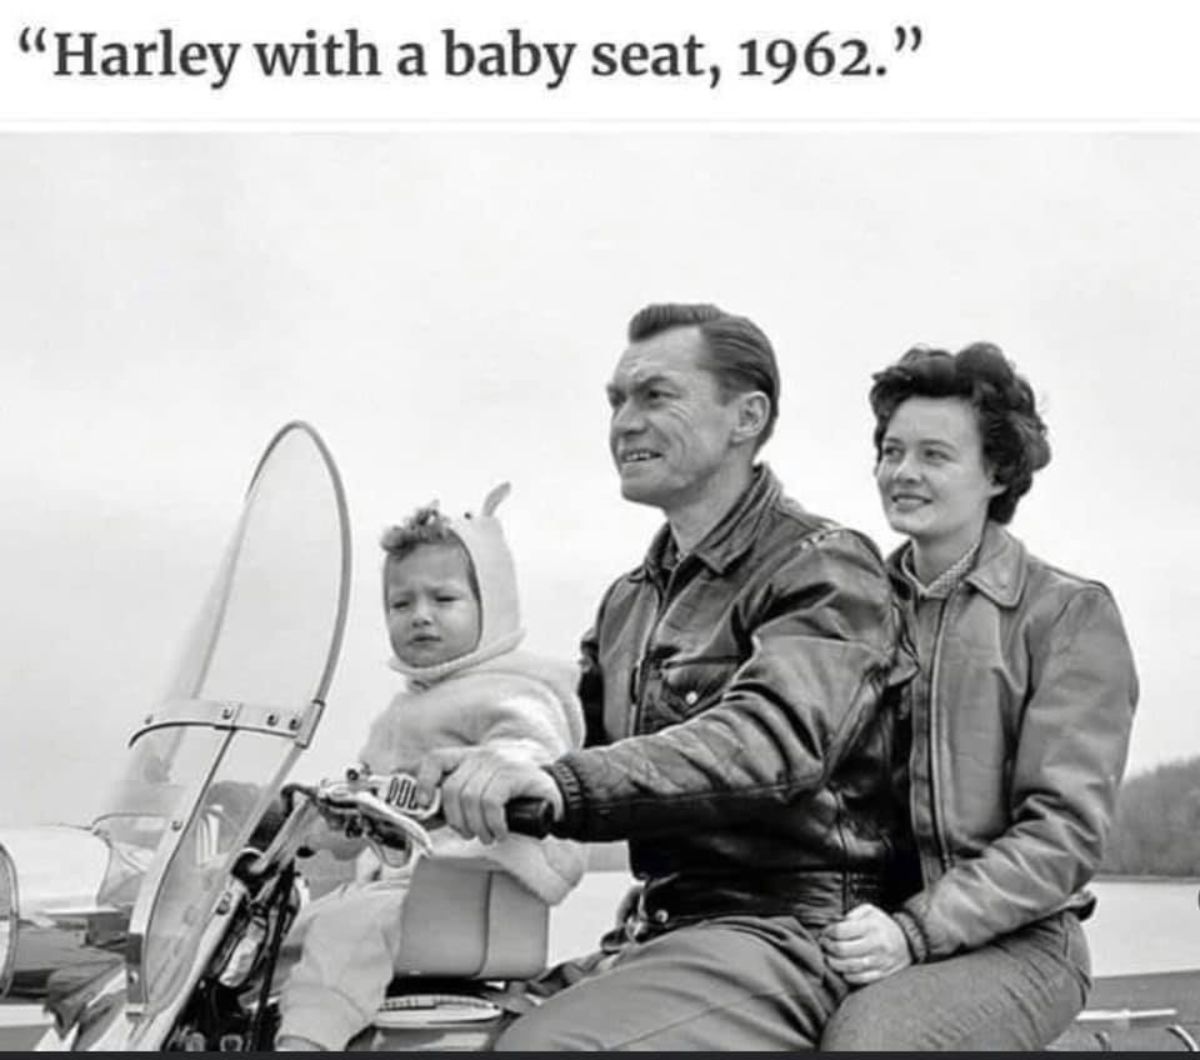 1962 harley davidson with baby seat - "Harley with a baby seat, 1962."